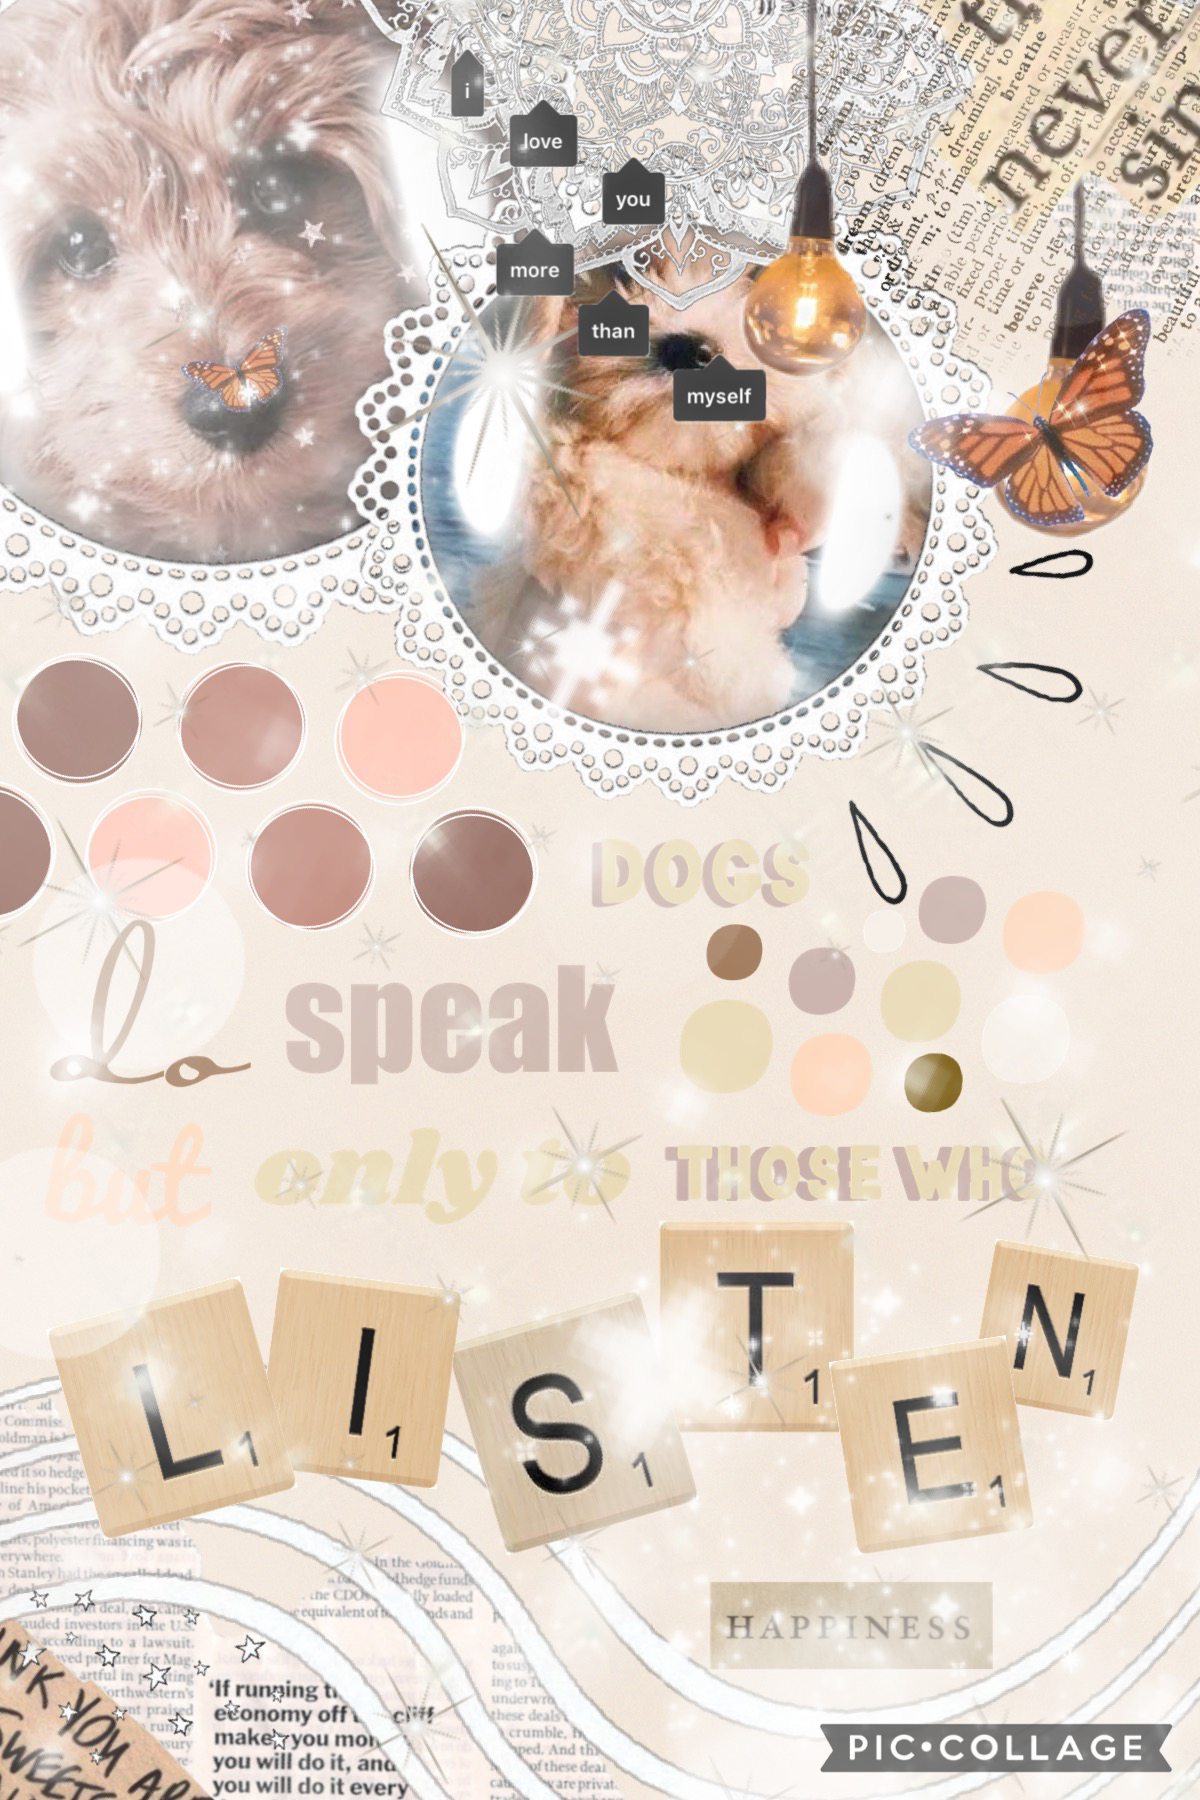 🐶tap!🐶
17-8-22-~dogs do talk, but only to people who listen~
qotd: fav animal?
aotd: dogs 🐶 (i have two! used to have three but one died)
this was inspired by lulu (clear_waves)! have a great day/night!